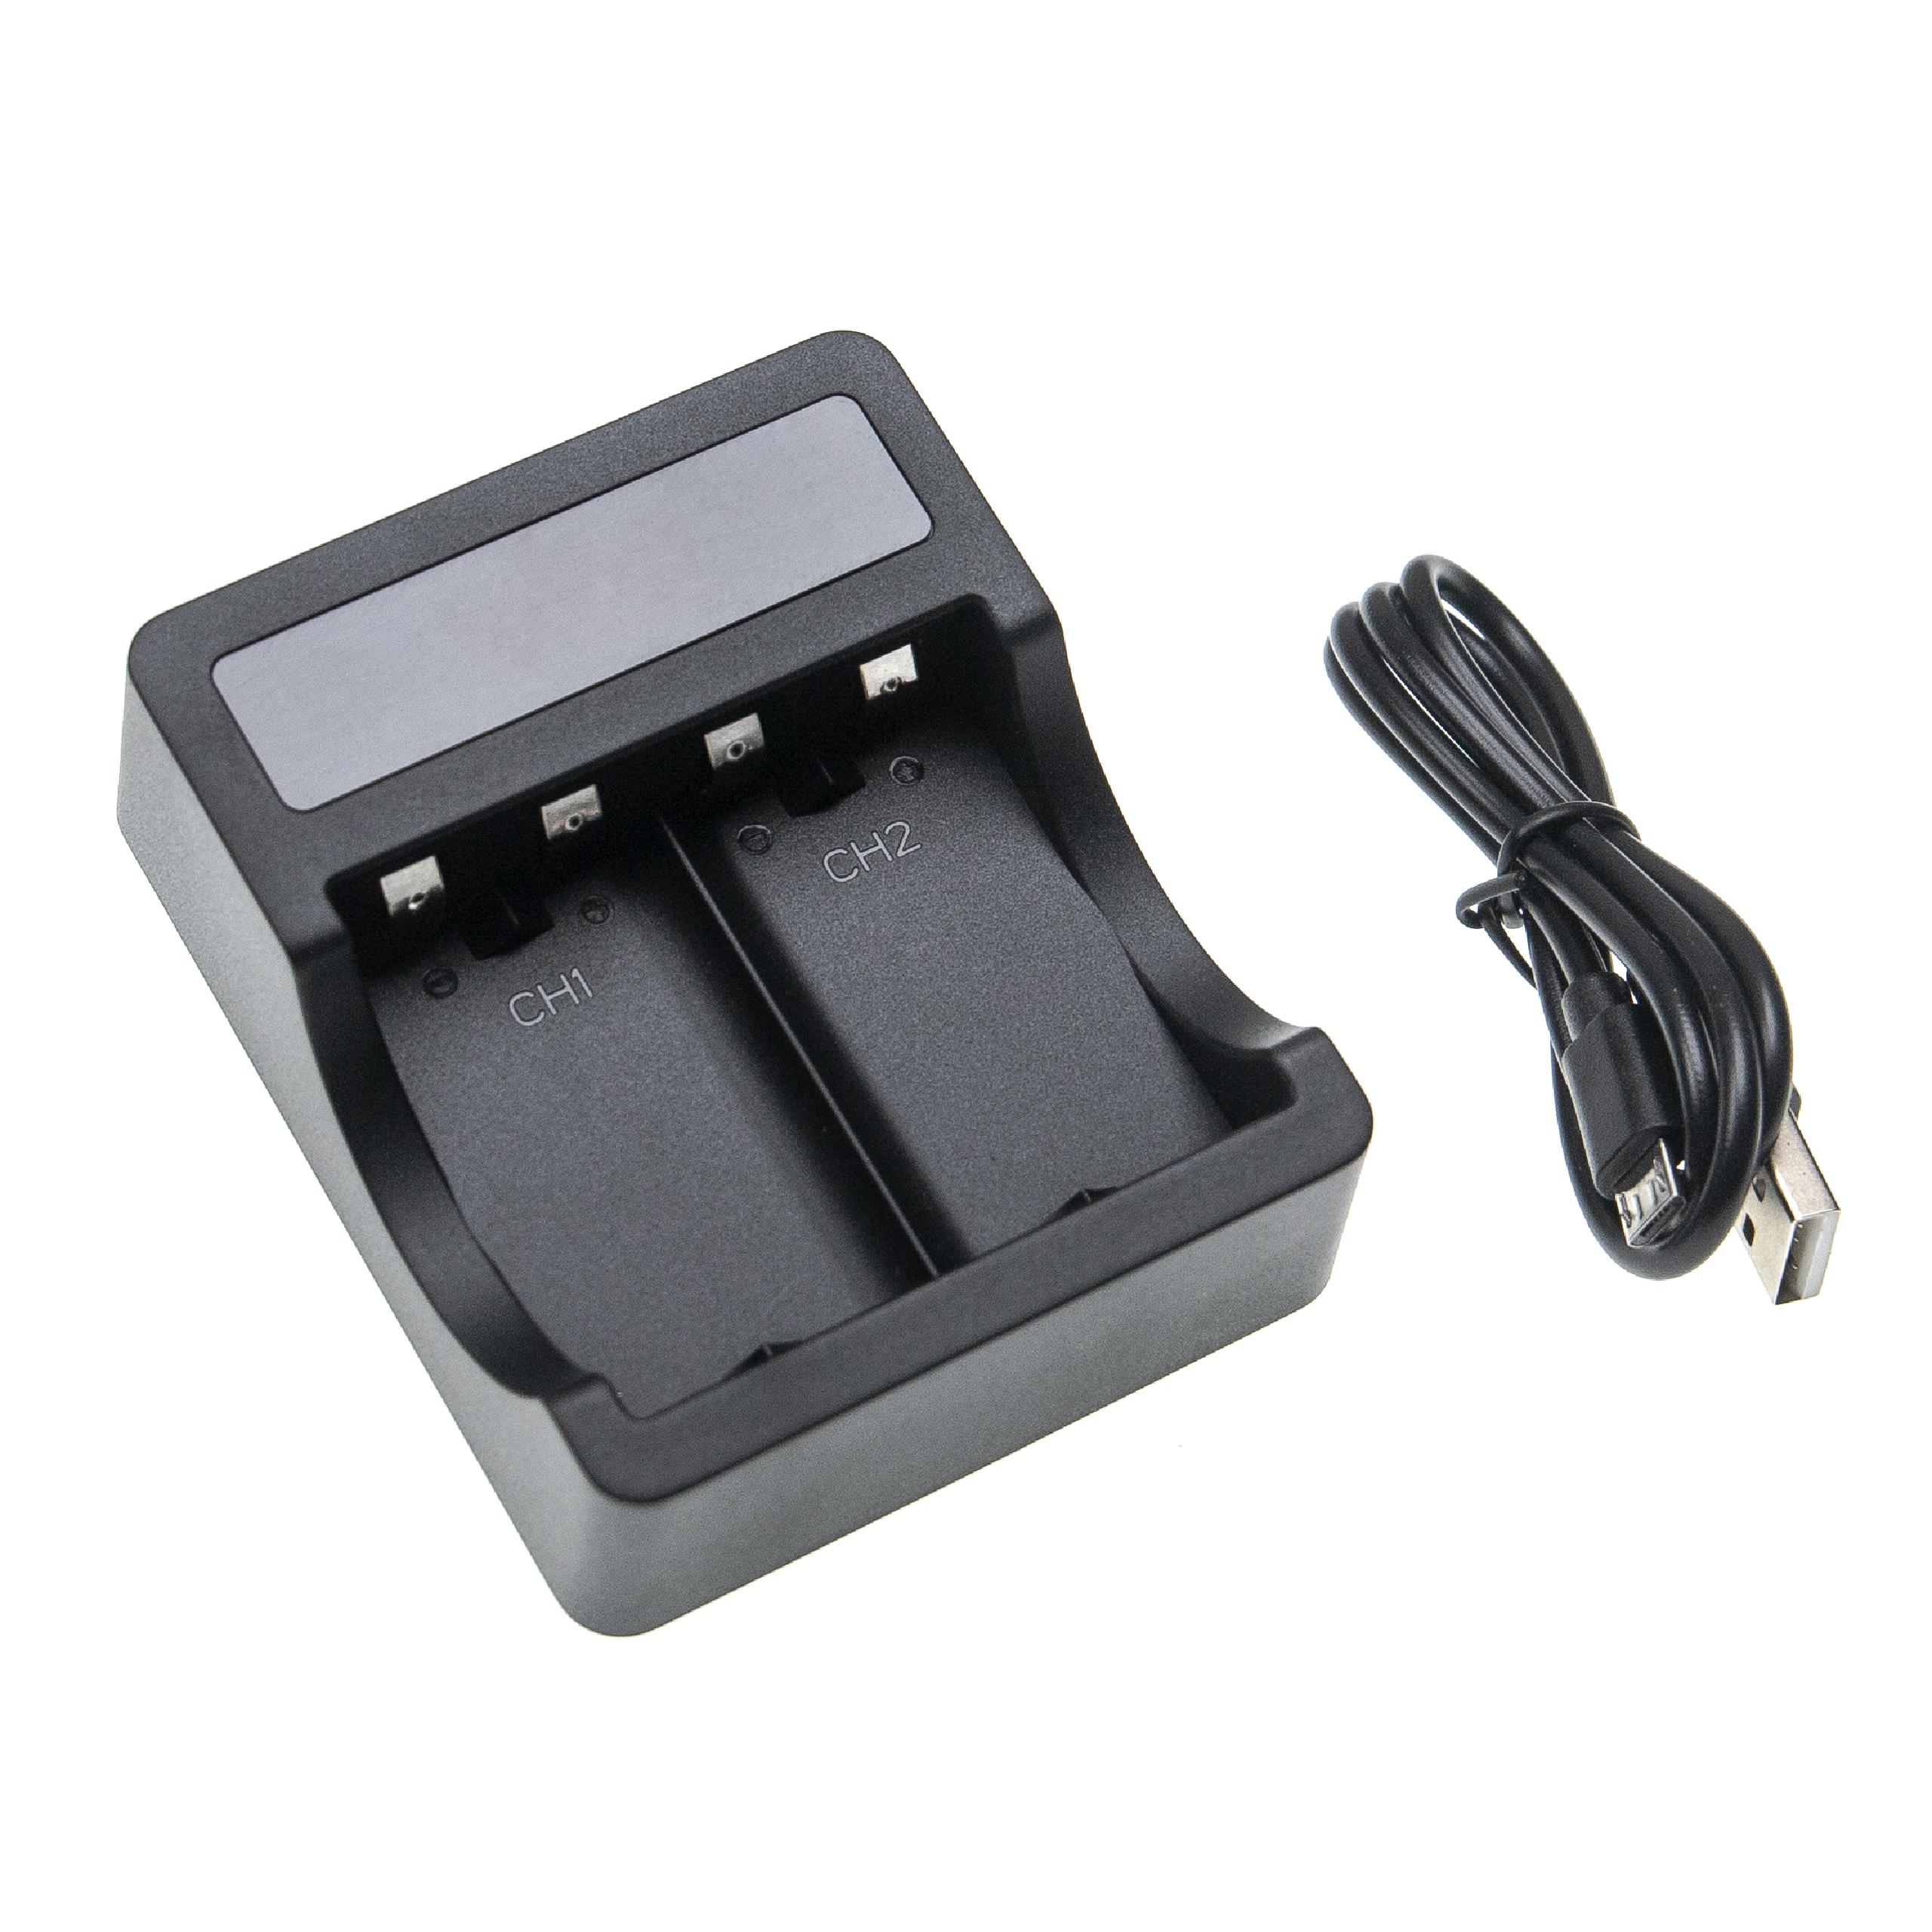 Dual Charging Station suitable for , Microsoft Microsoft Controller etc. - Charging Cradle + Lead